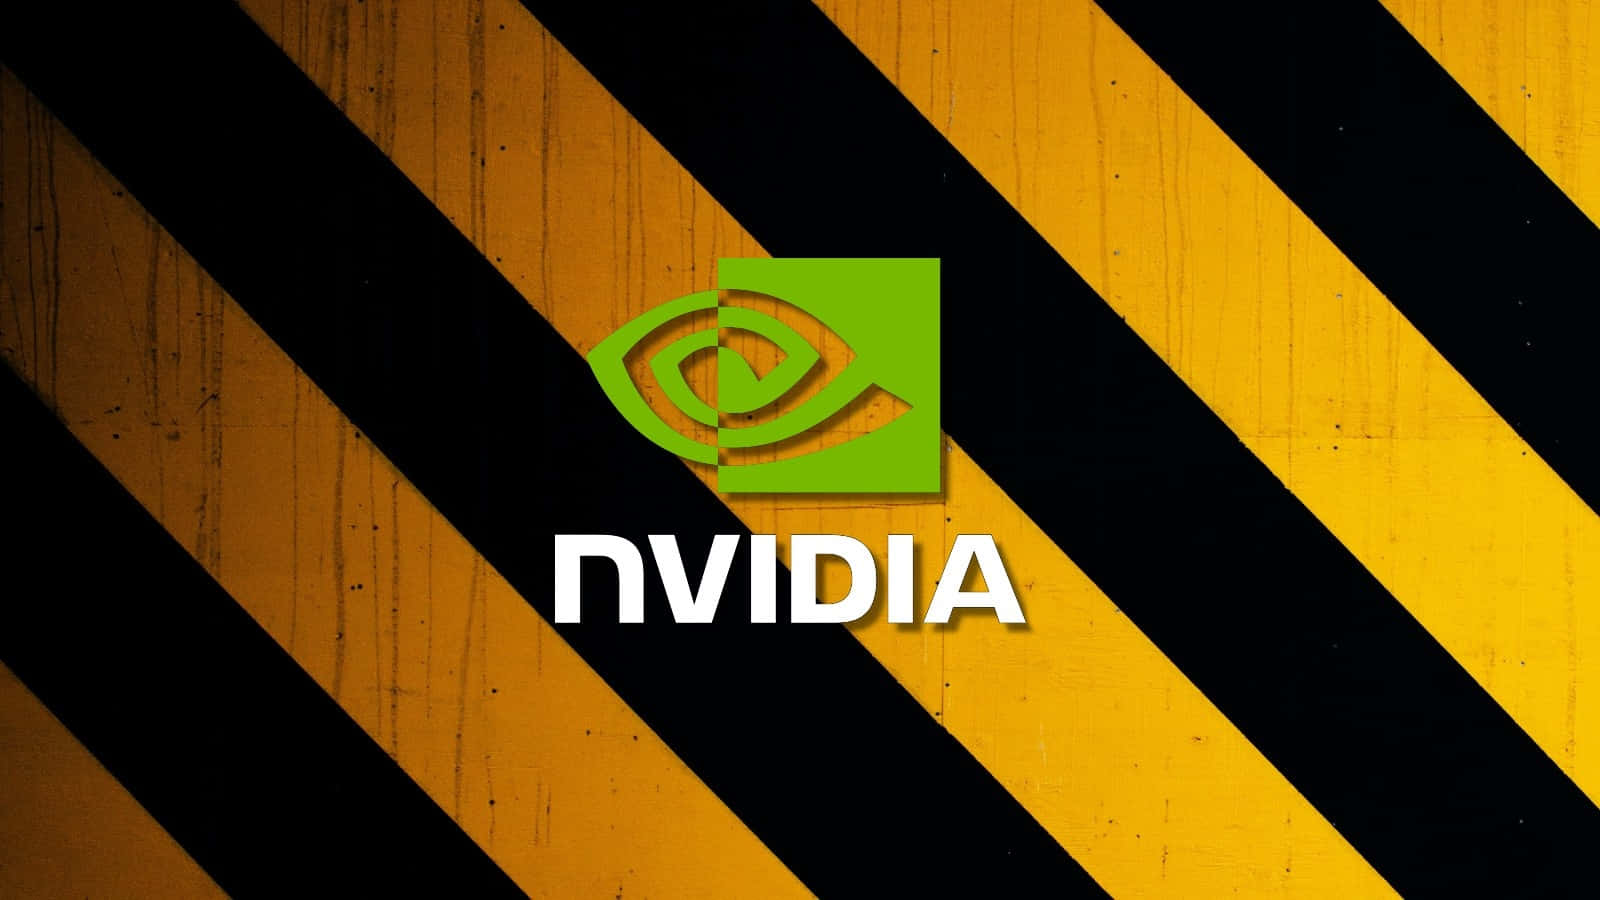 "Unlock your gaming potential with Nvidia"